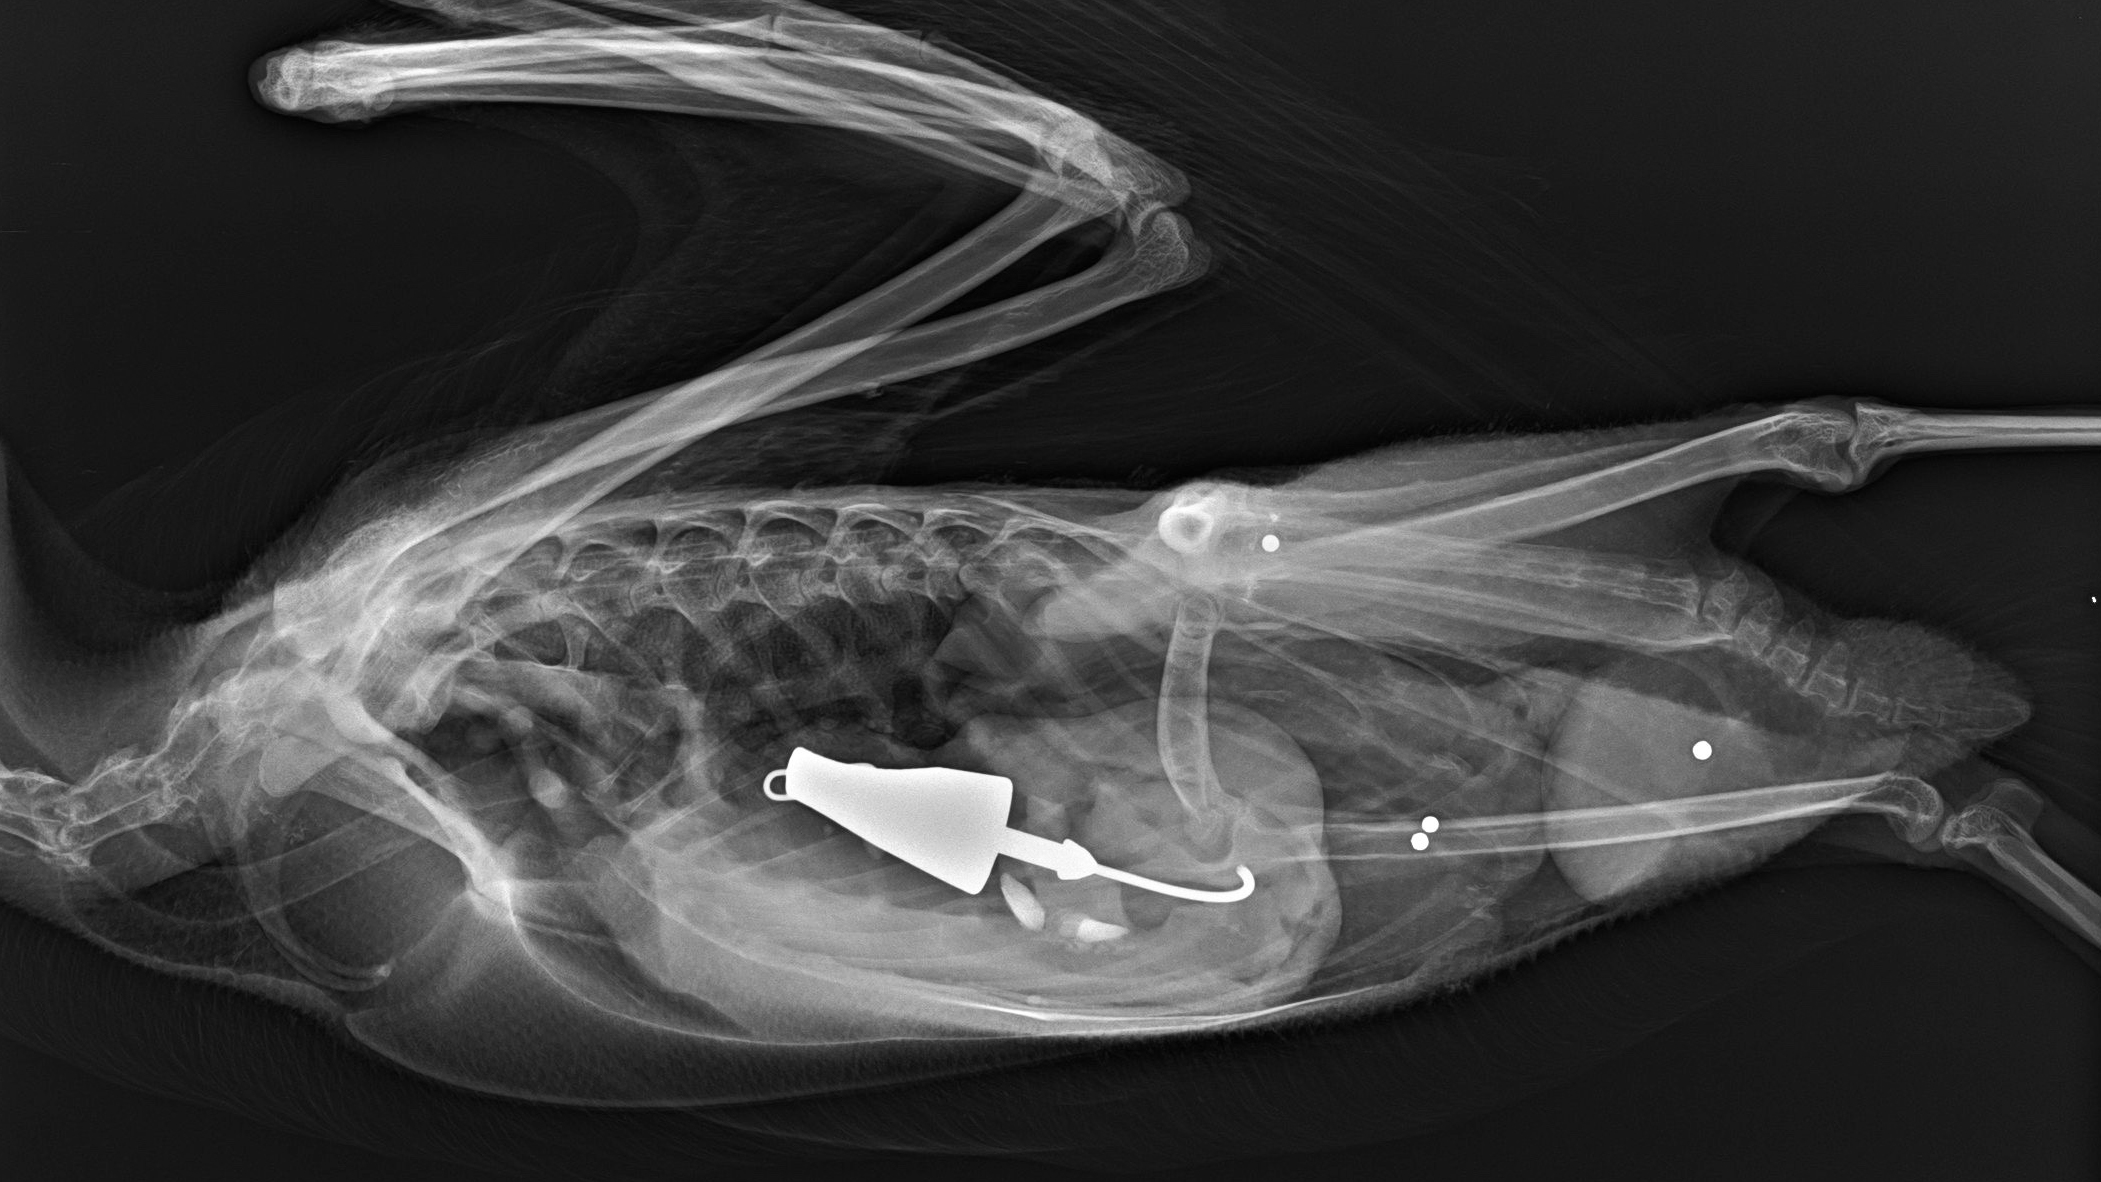 X-Ray of loon poisoned by lead tackle. Photo courtesy of Dr. Mark Pokras, Tufts Cummings School of Veterinary Medicine